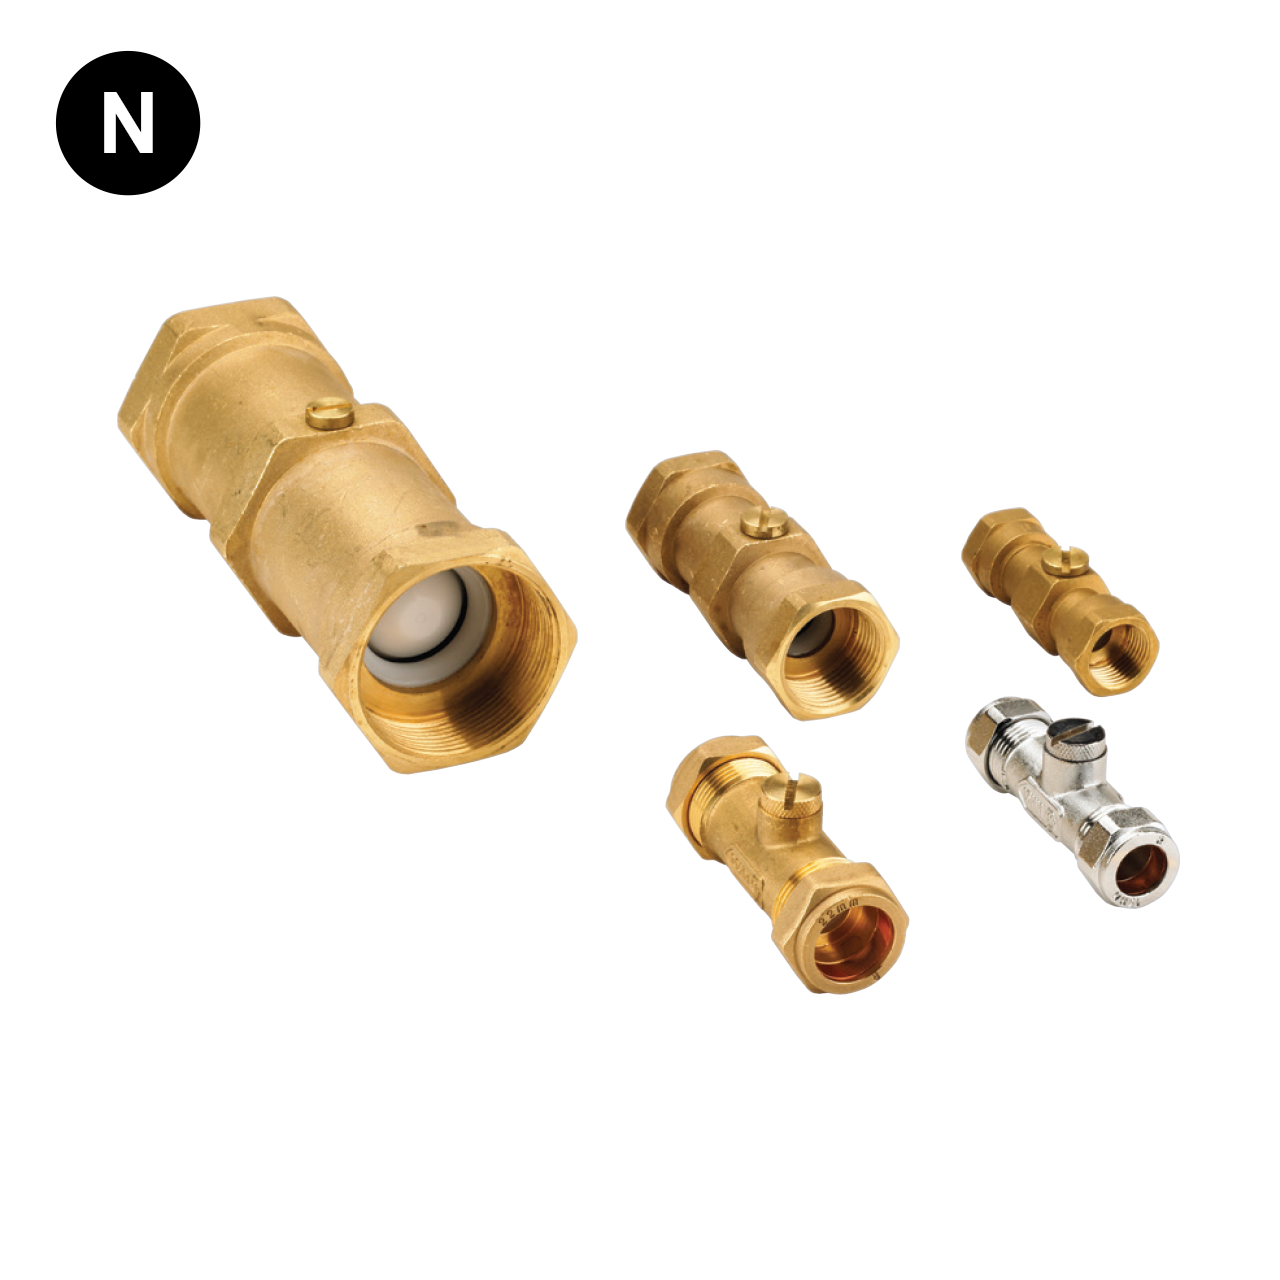 Cat 3 Floguard Double Check Valve with Test Point – Flowstar (UK) Limited